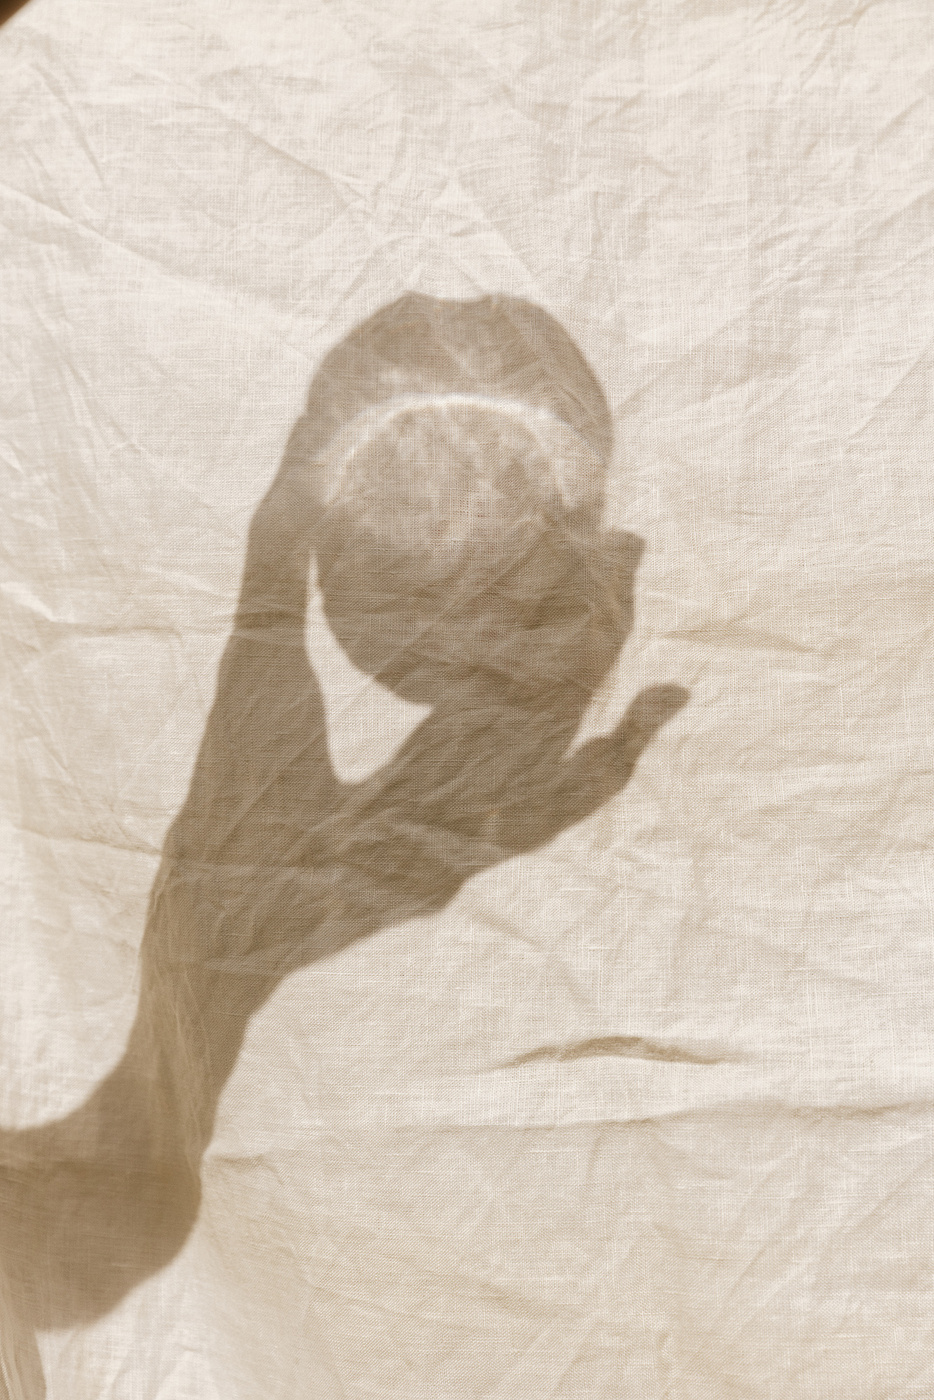 Shadow of a Person's Hand Holding a Bottle